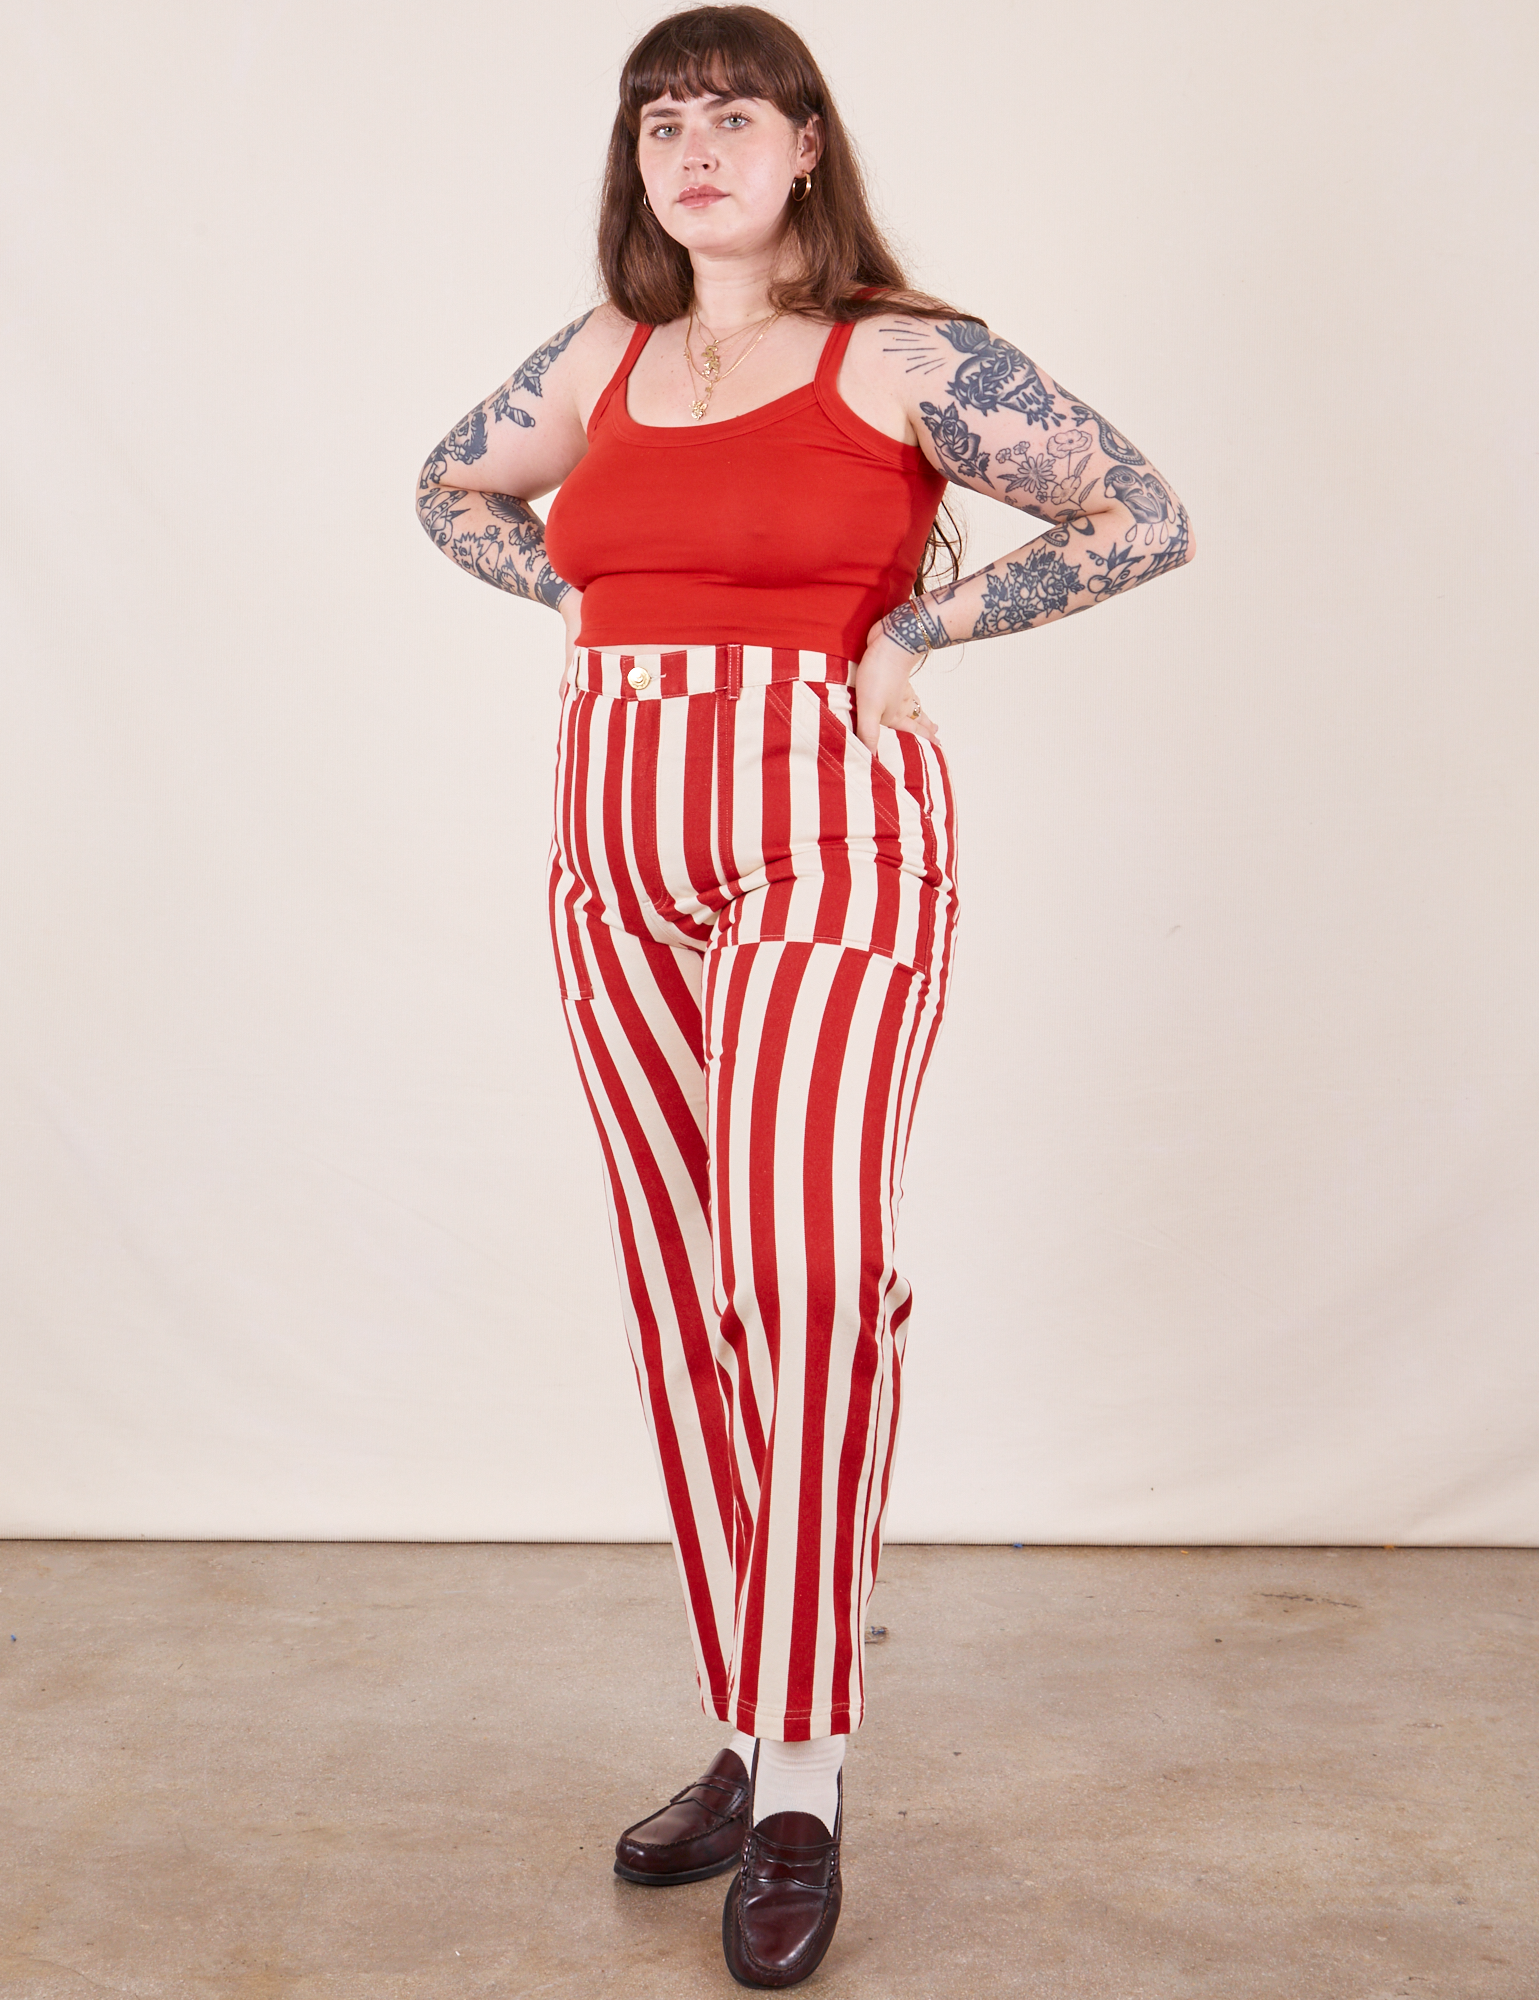 Sydney is wearing Work Pants in Cherry Stripe and mustang red Cropped Cami